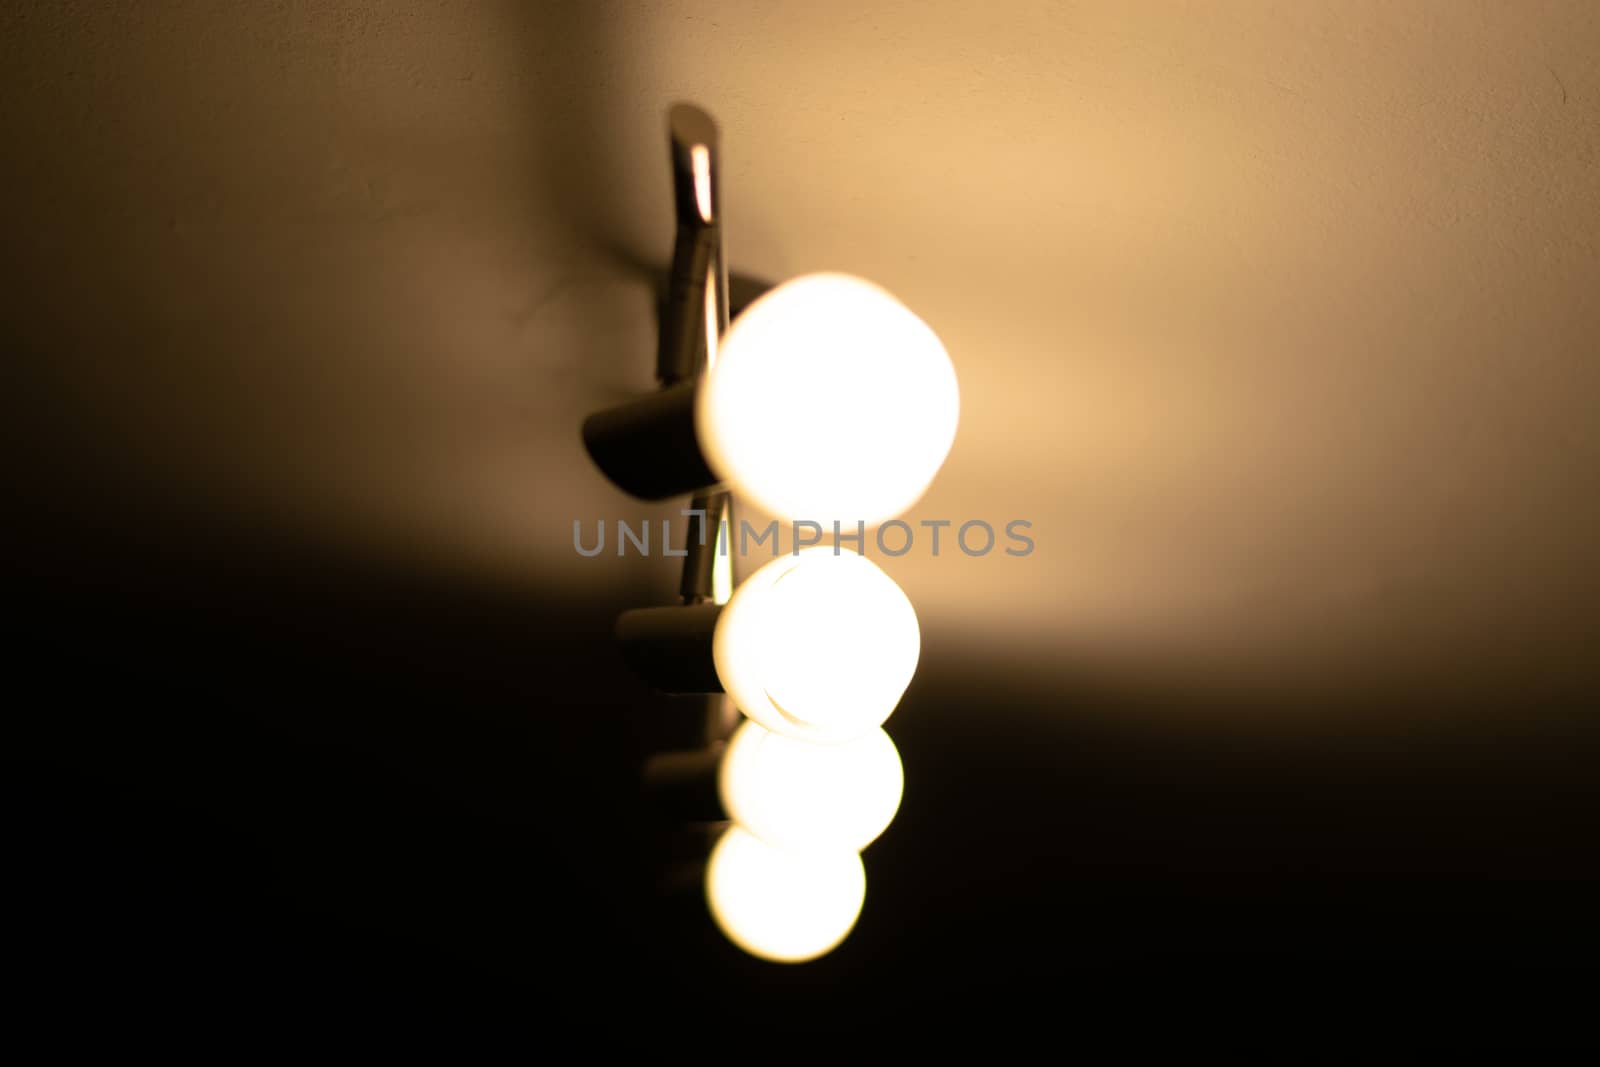 Some warm light bulbs mounted on a ceiling in a house - Electricity and illumination concept, Bucharest, Romania.